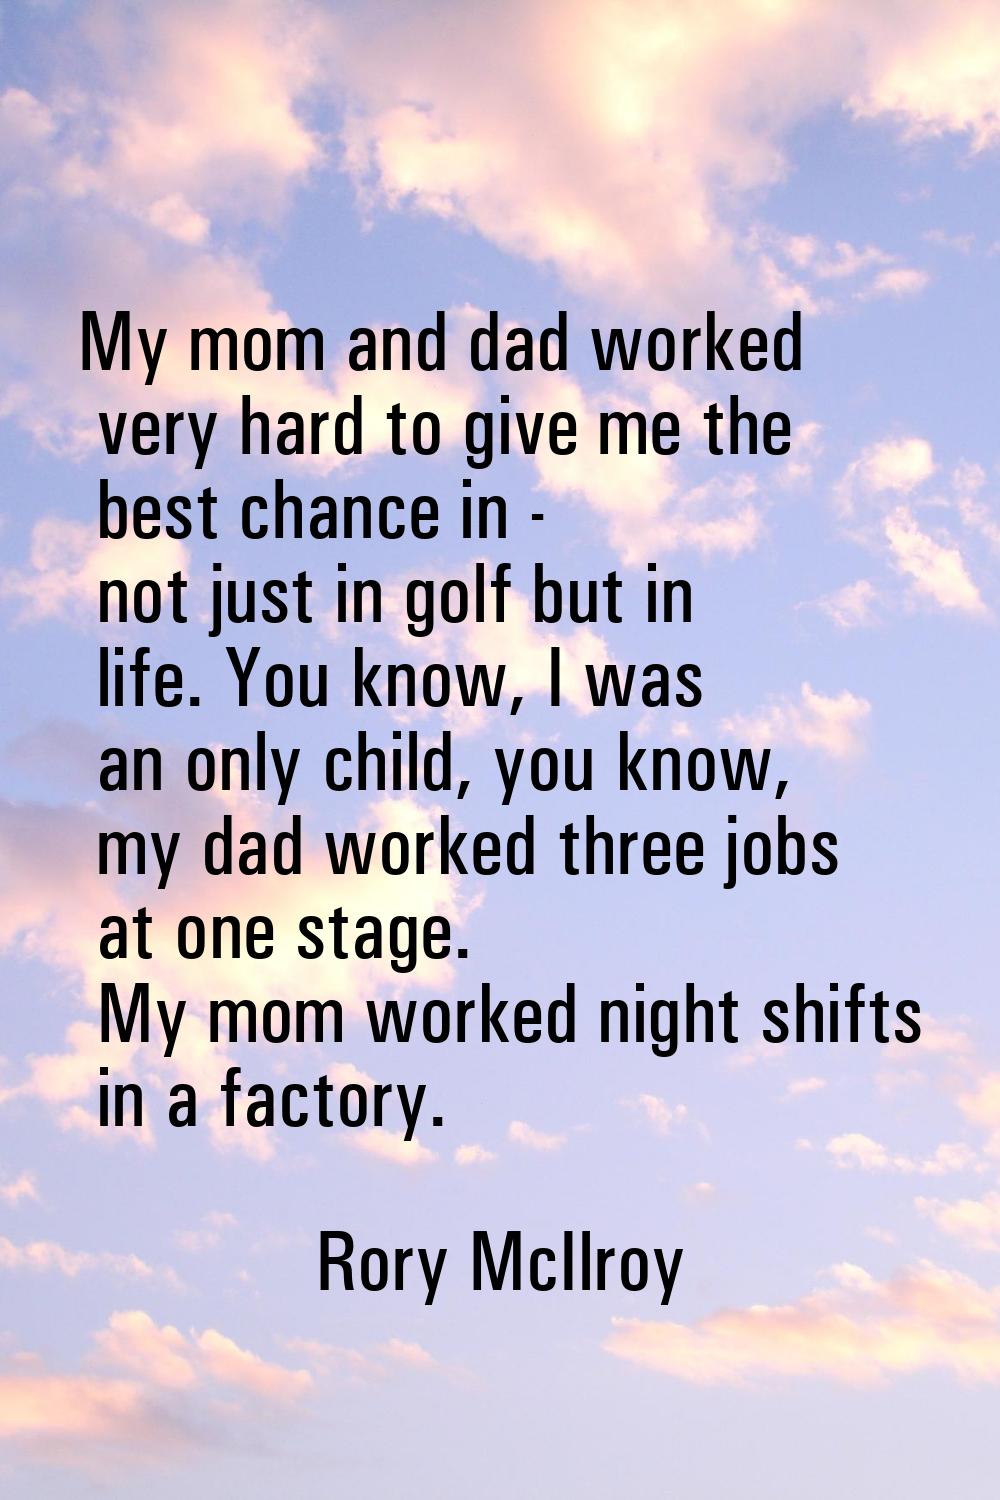 My mom and dad worked very hard to give me the best chance in - not just in golf but in life. You k